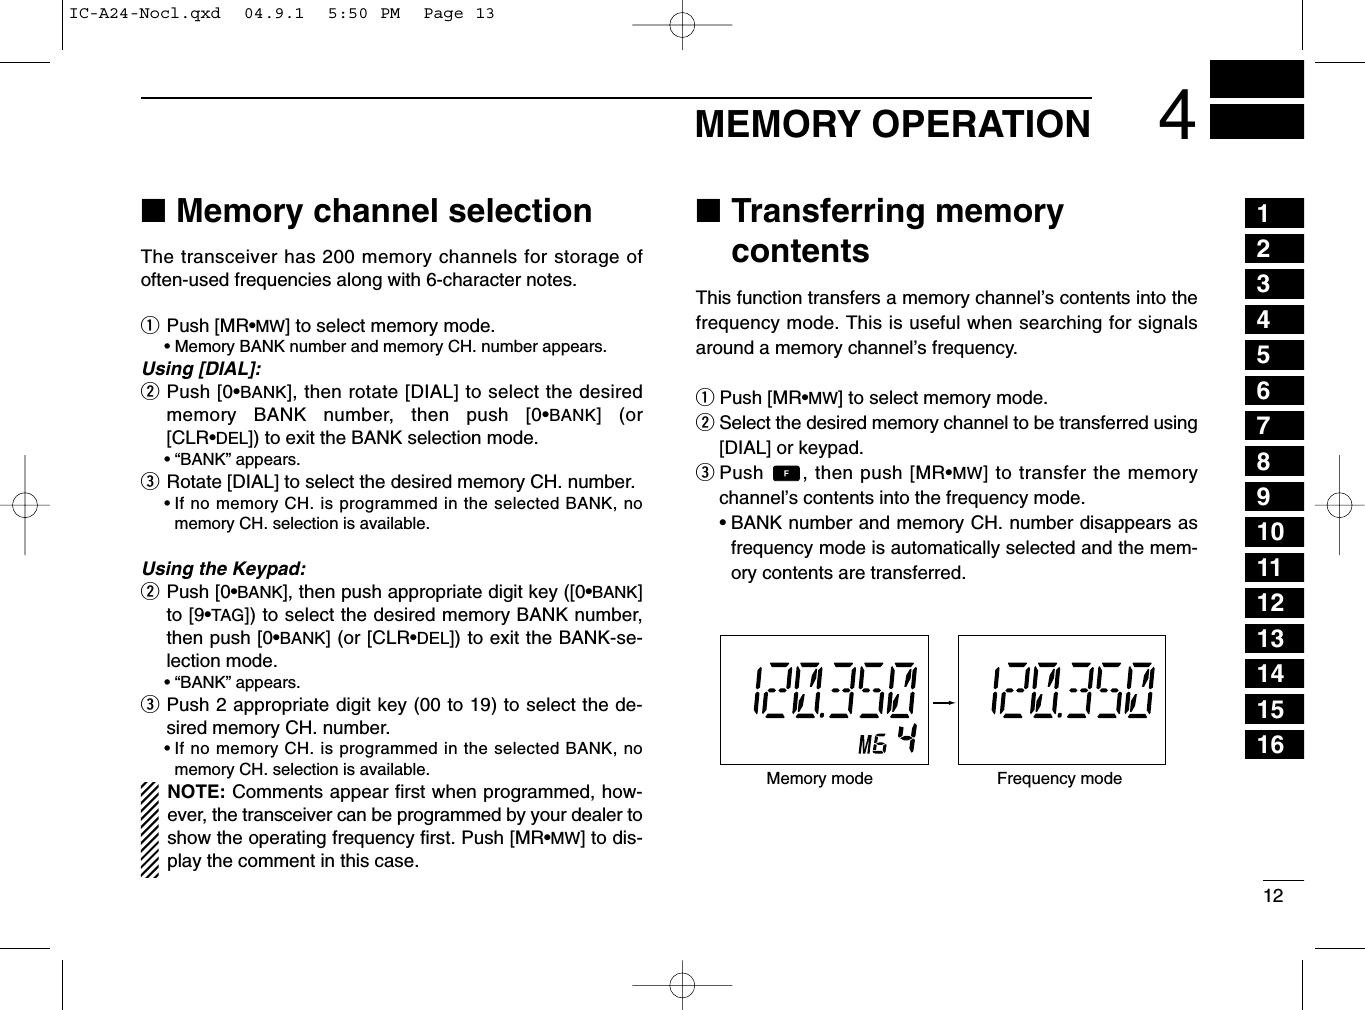 124MEMORY OPERATION■Memory channel selectionThe transceiver has 200 memory channels for storage ofoften-used frequencies along with 6-character notes.qPush [MR•MW] to select memory mode.•Memory BANK number and memory CH. number appears.Using [DIAL]:wPush [0•BANK], then rotate [DIAL] to select the desiredmemory BANK number, then push [0•BANK] (or[CLR•DEL]) to exit the BANK selection mode.• “BANK” appears.eRotate [DIAL] to select the desired memory CH. number.•If no memory CH. is programmed in the selected BANK, nomemory CH. selection is available.Using the Keypad:wPush [0•BANK], then push appropriate digit key ([0•BANK]to [9•TAG]) to select the desired memory BANK number,then push [0•BANK] (or [CLR•DEL]) to exit the BANK-se-lection mode.• “BANK” appears.ePush 2 appropriate digit key (00 to 19) to select the de-sired memory CH. number.•If no memory CH. is programmed in the selected BANK, nomemory CH. selection is available.NOTE: Comments appear ﬁrst when programmed, how-ever, the transceiver can be programmed by your dealer toshow the operating frequency ﬁrst. Push [MR•MW] to dis-play the comment in this case.■Transferring memorycontentsThis function transfers a memory channel’s contents into thefrequency mode. This is useful when searching for signalsaround a memory channel’s frequency.qPush [MR•MW] to select memory mode.wSelect the desired memory channel to be transferred using[DIAL] or keypad.ePush  , then push [MR•MW] to transfer the memorychannel’s contents into the frequency mode.•BANK number and memory CH. number disappears asfrequency mode is automatically selected and the mem-ory contents are transferred.Memory mode Frequency mode12345678910111213141516IC-A24-Nocl.qxd  04.9.1  5:50 PM  Page 13